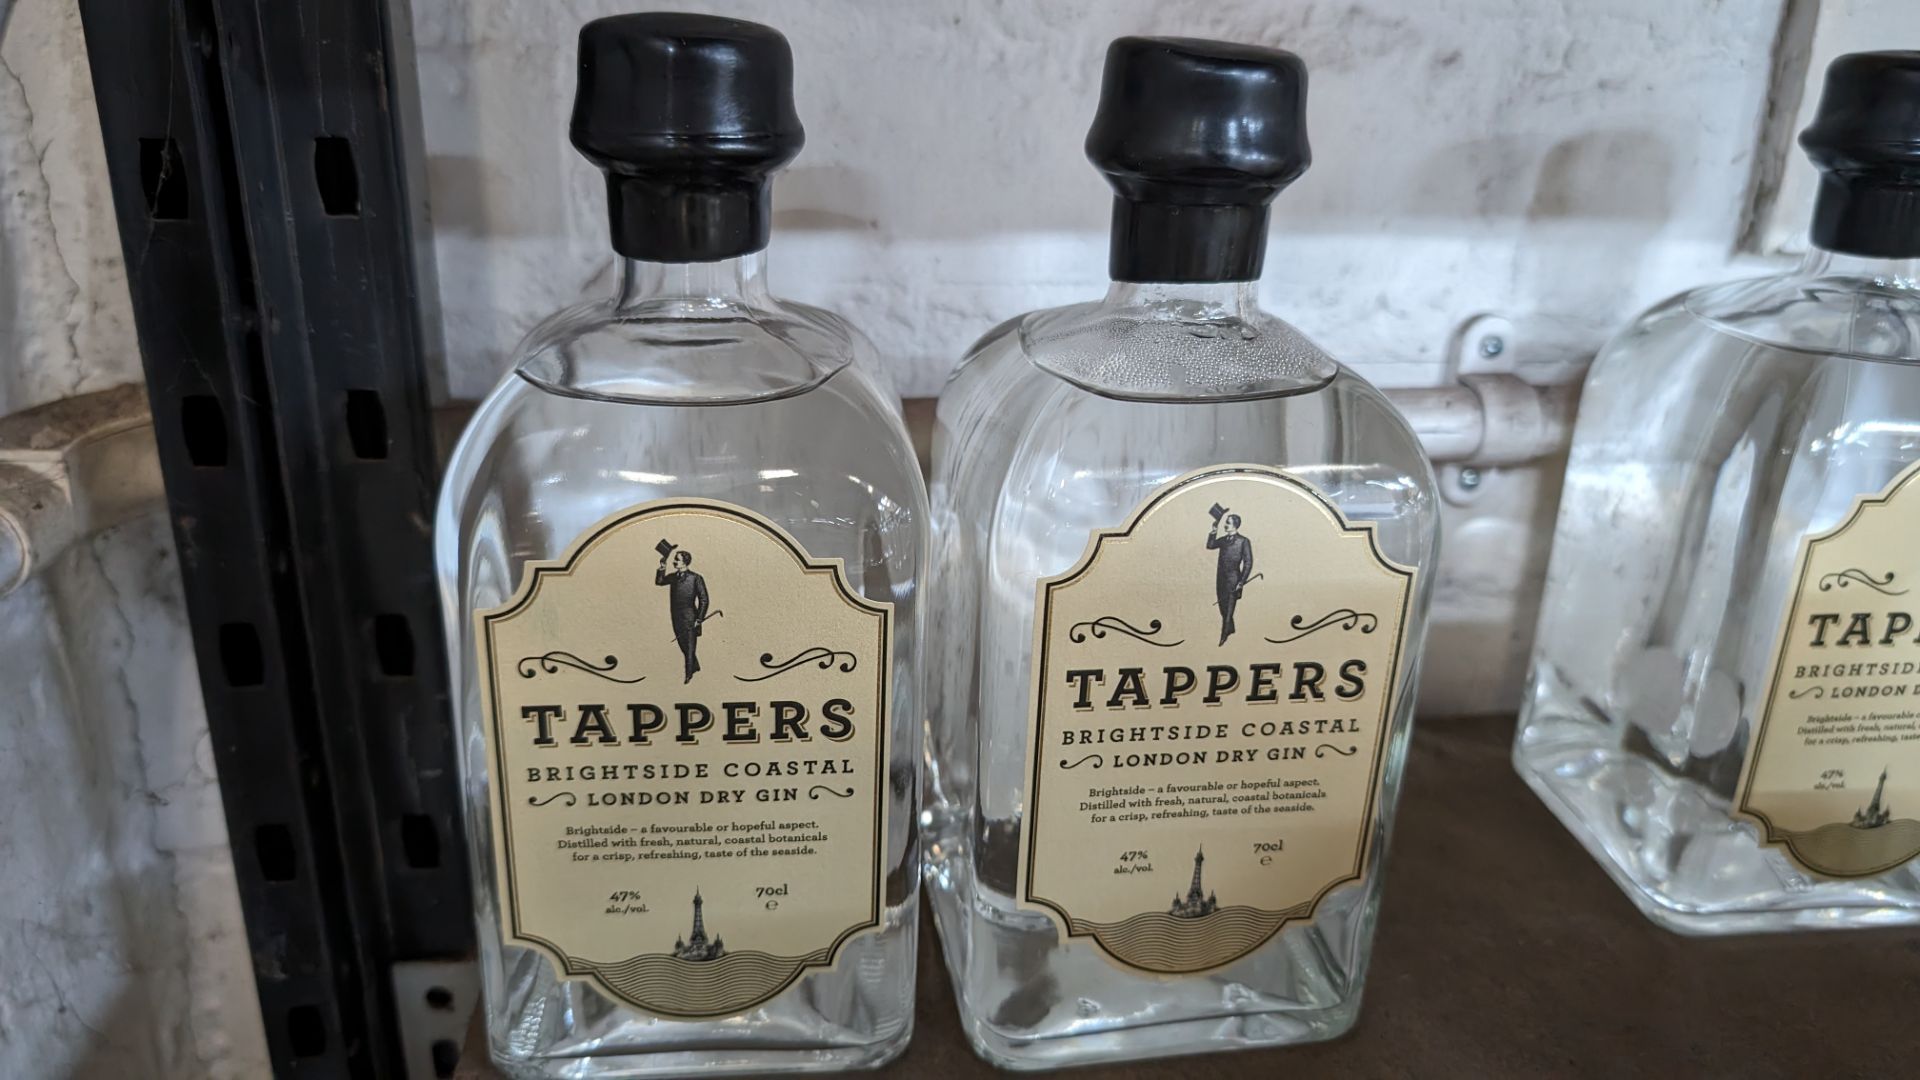 2 off 700ml bottles of Tappers 47% ABV Brightside Coastal London Dry Gin. Individually numbered bot - Image 2 of 4